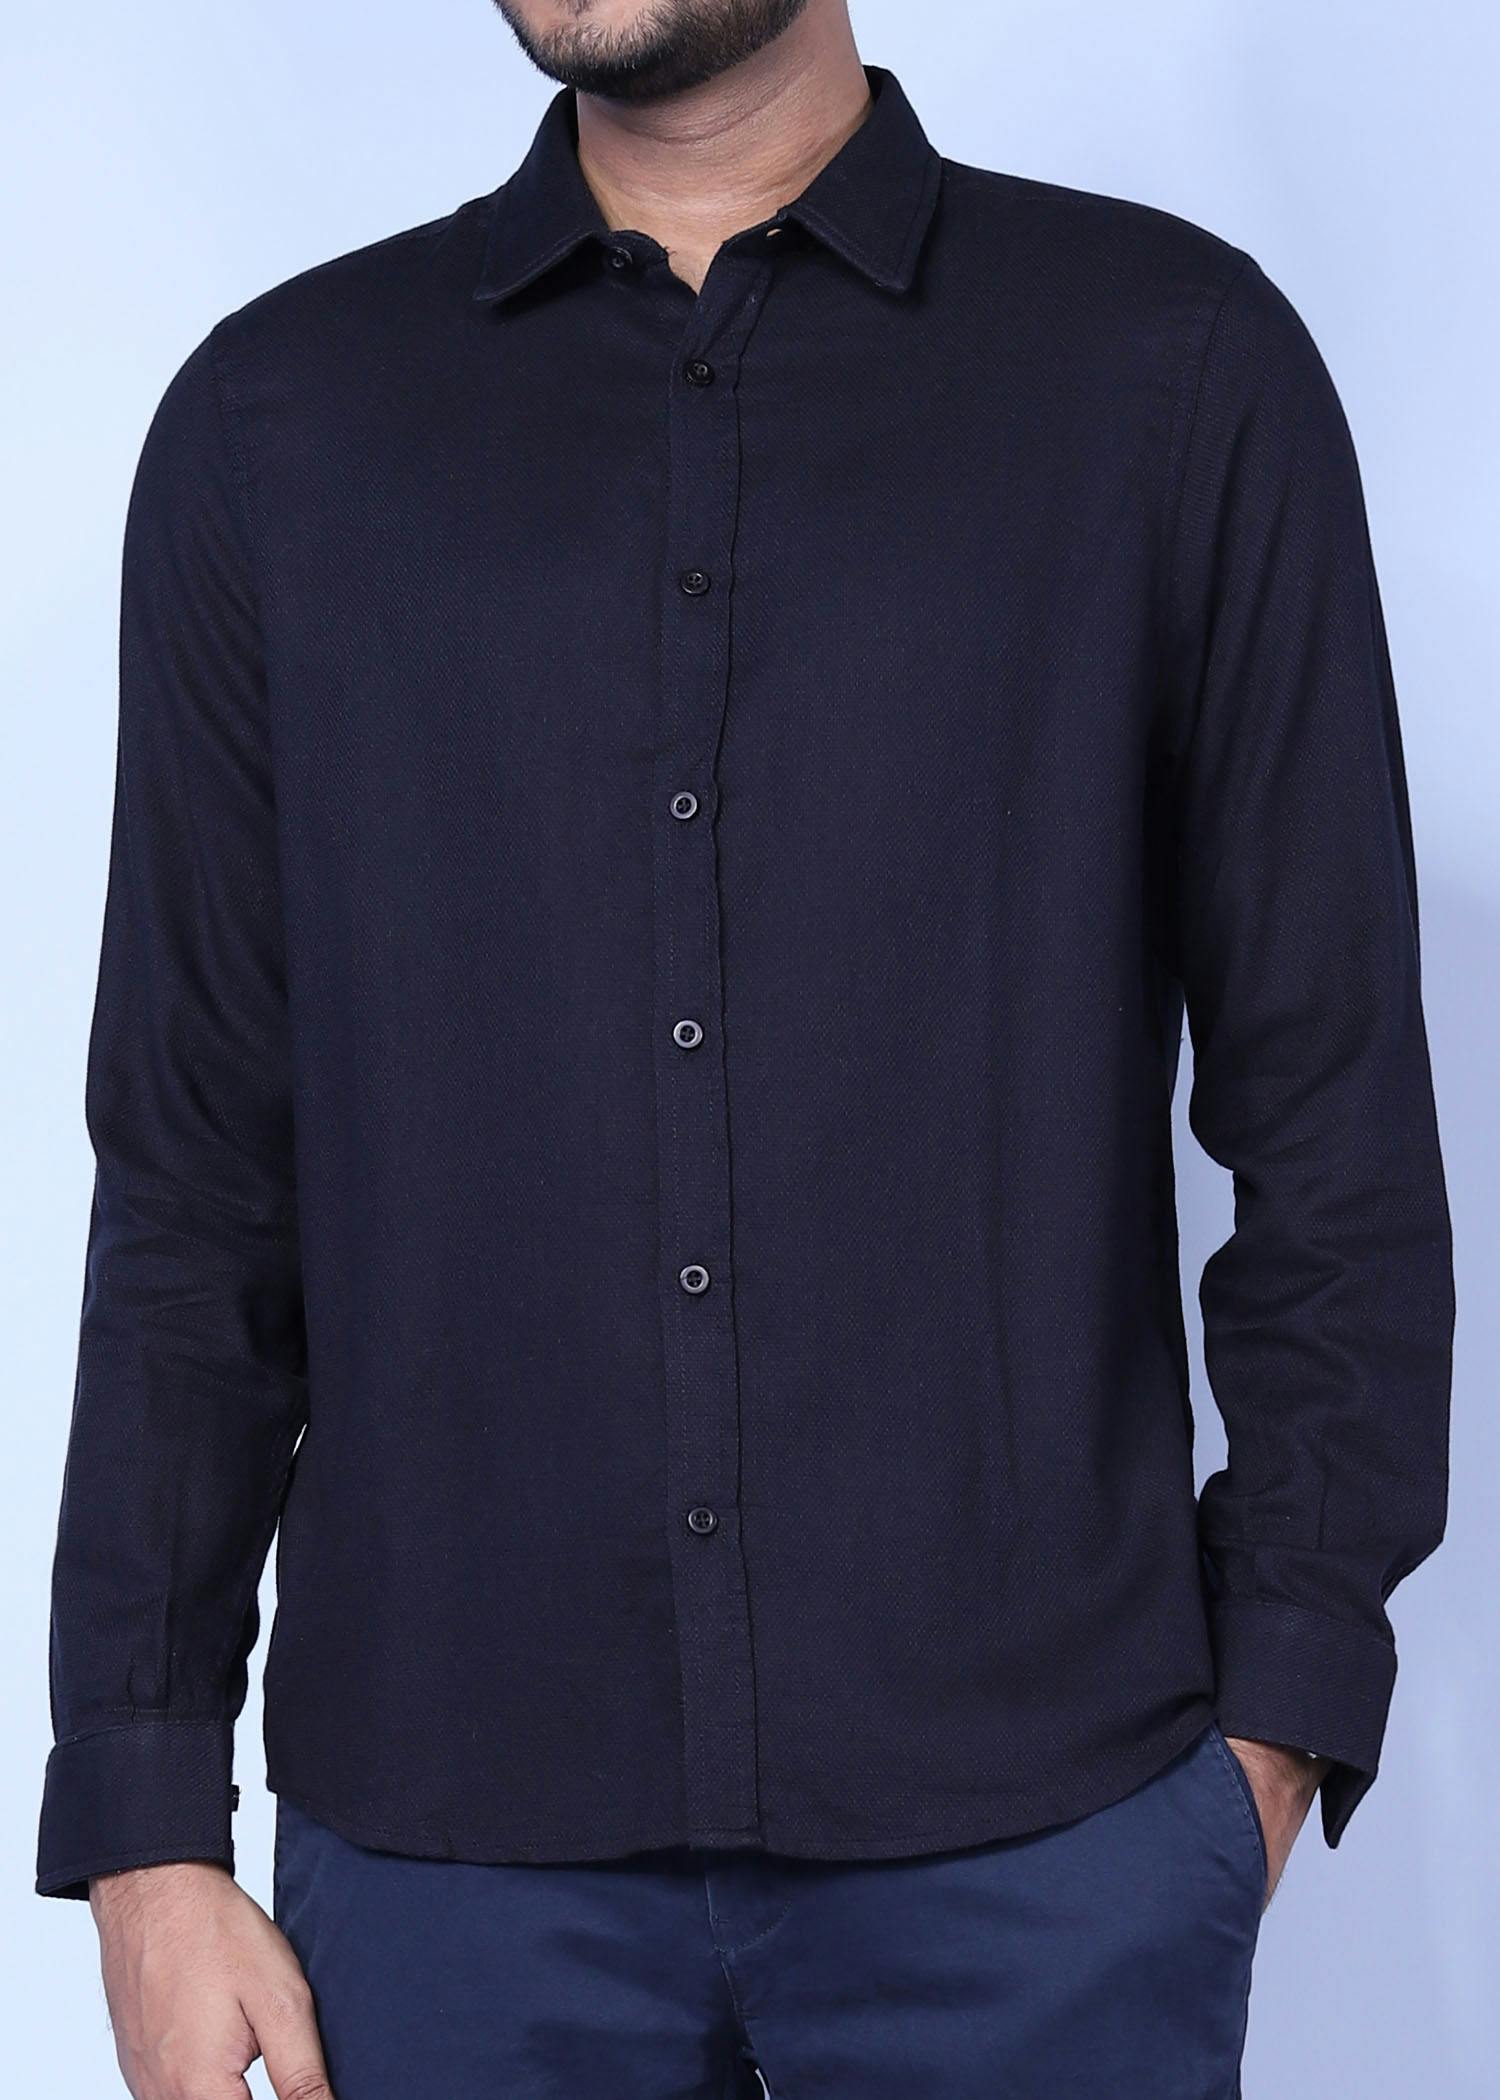 istanbul xv fs shirt black color facecropped